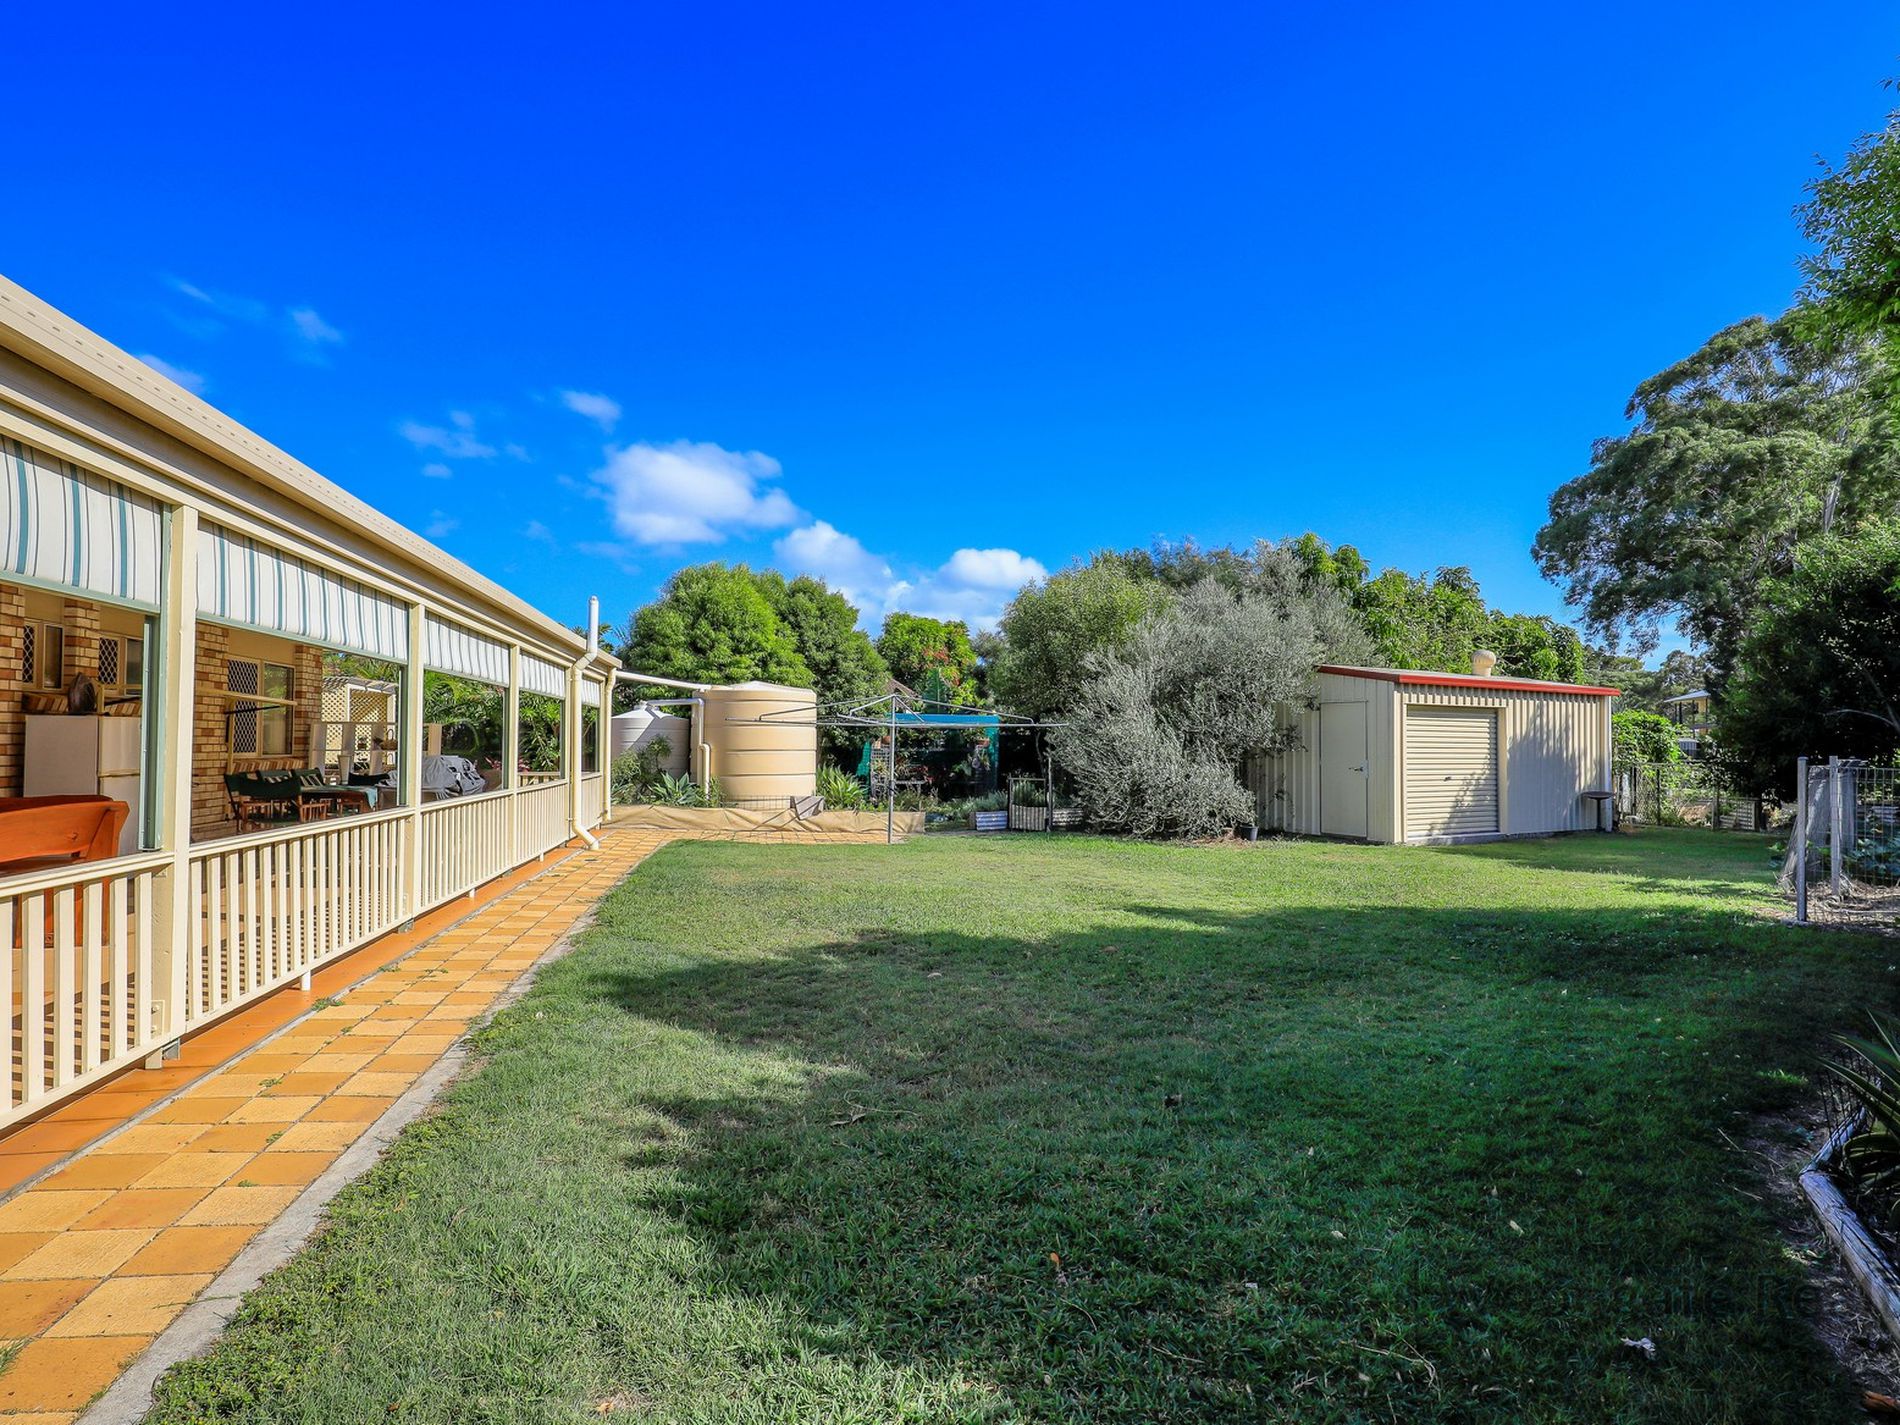 27 Coral Sea Dr, Woodgate